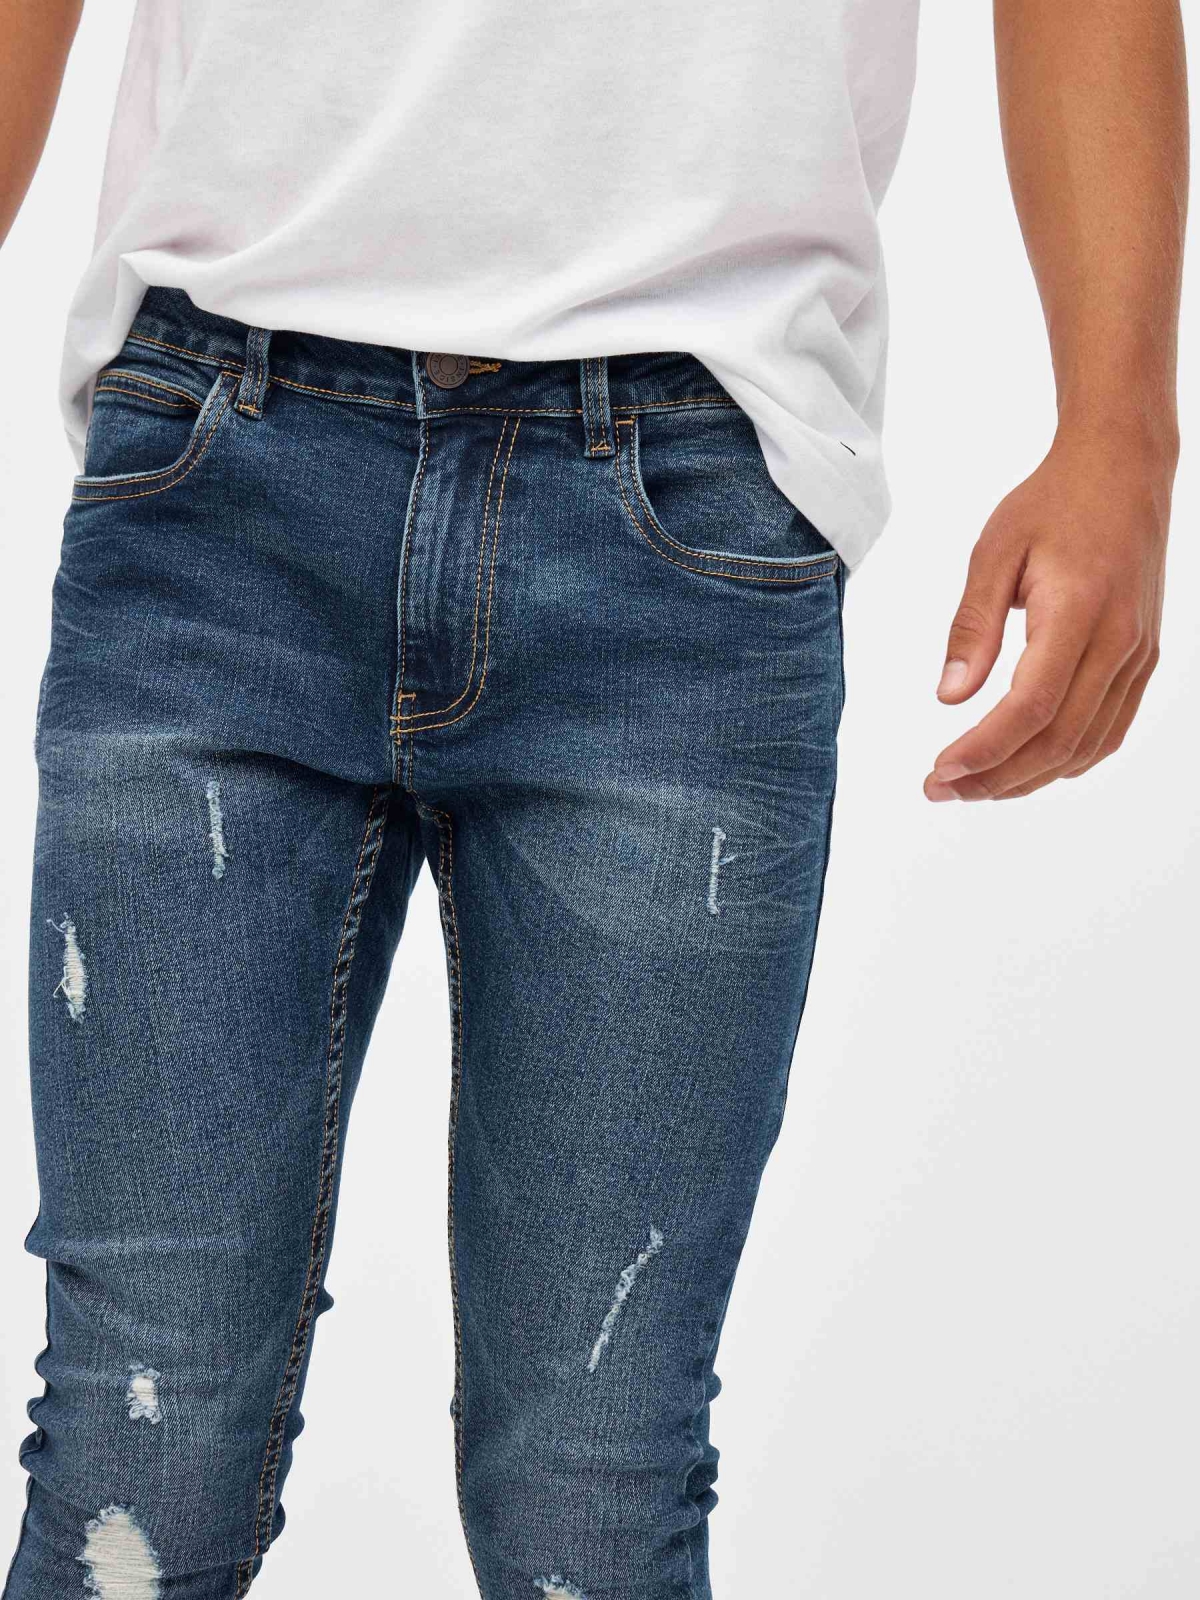 Men's superskinny jeans navy detail view